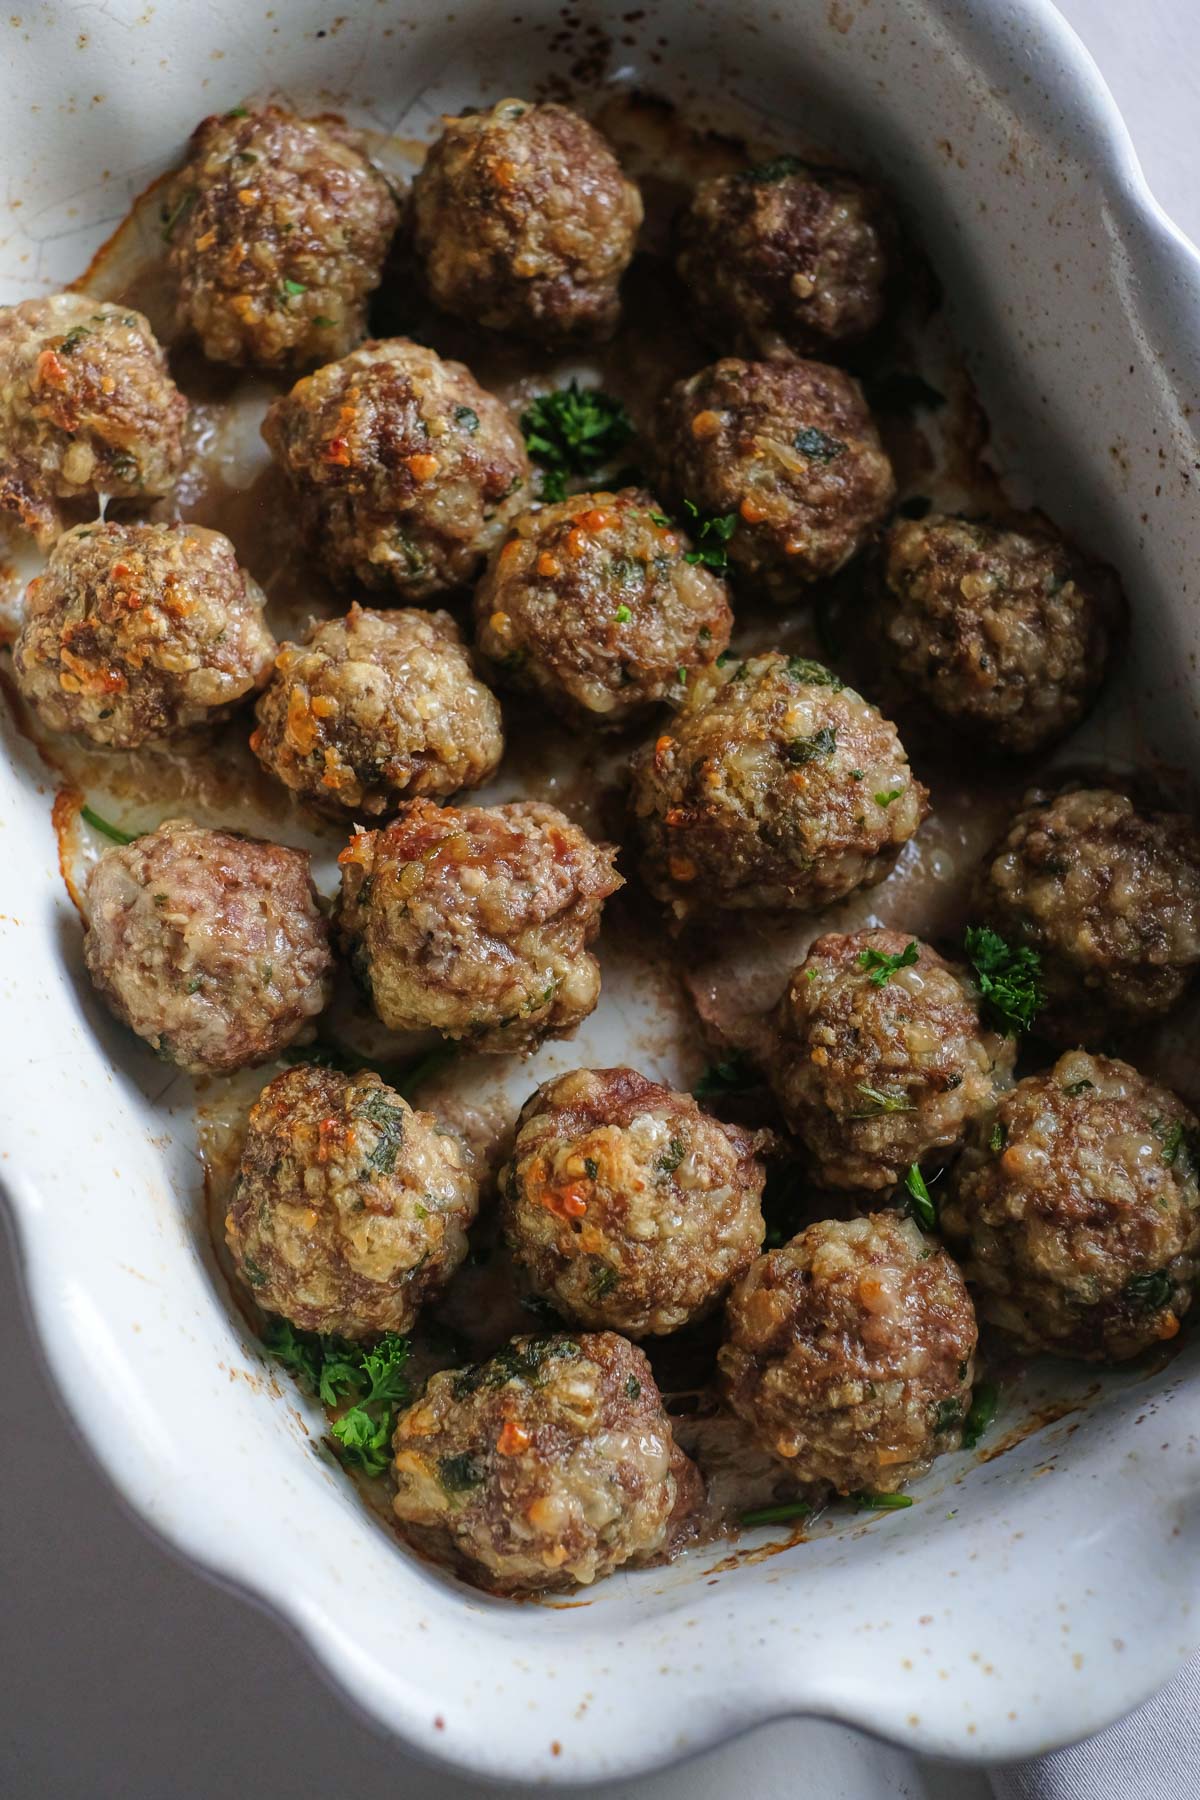 the finished oven baked meatballs in a serving dish